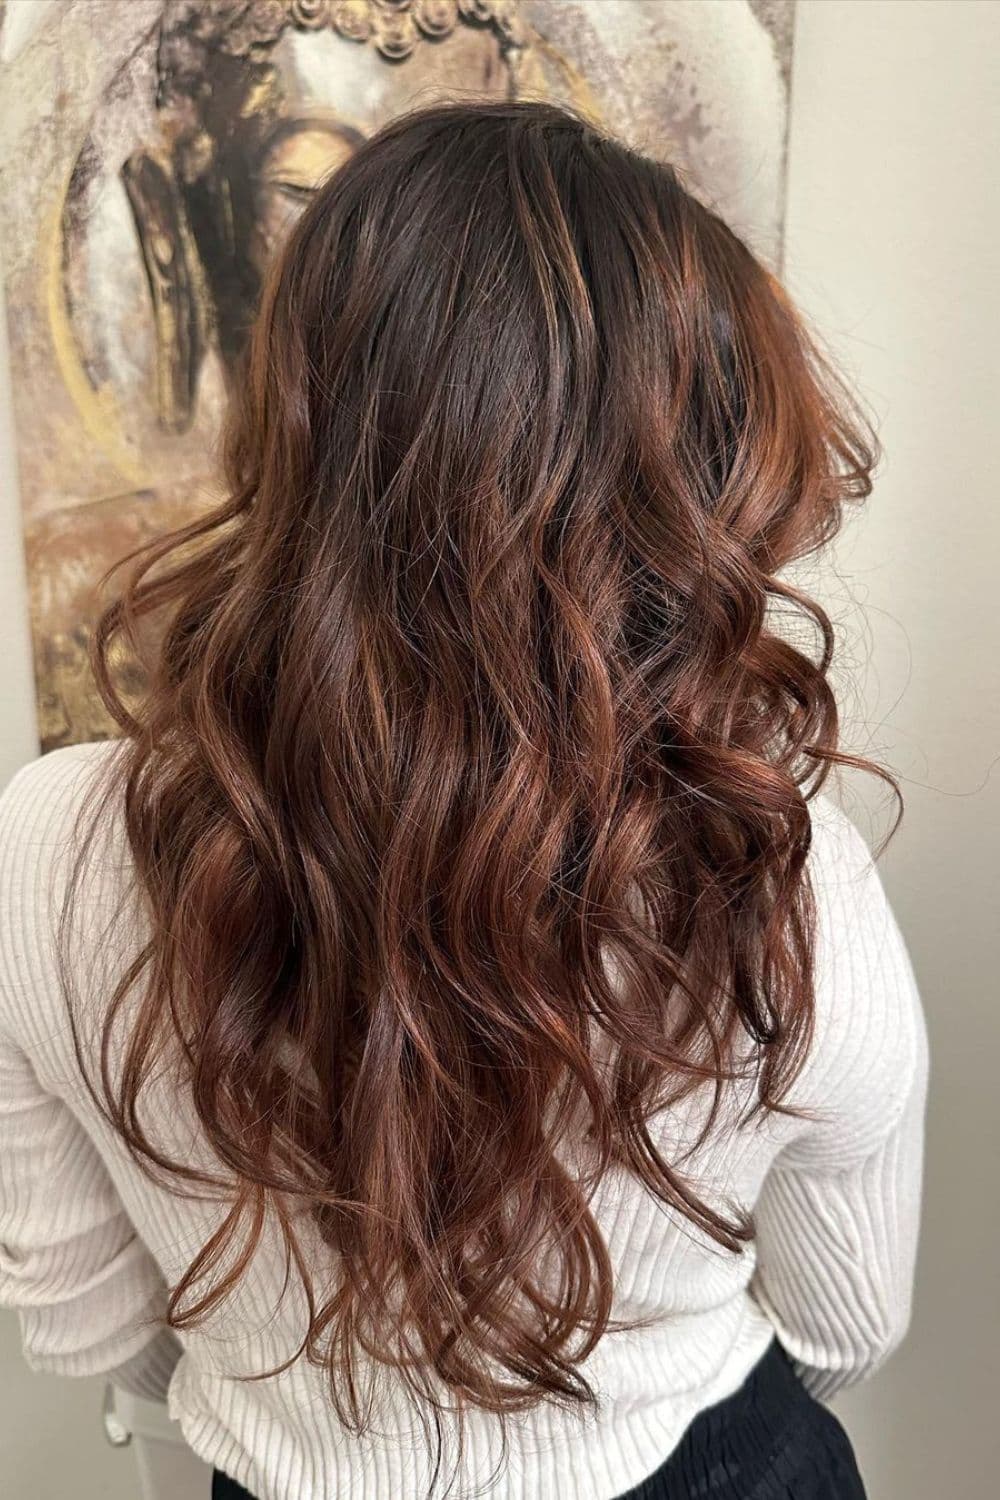 A woman with long chocolate brown balayage with curls.